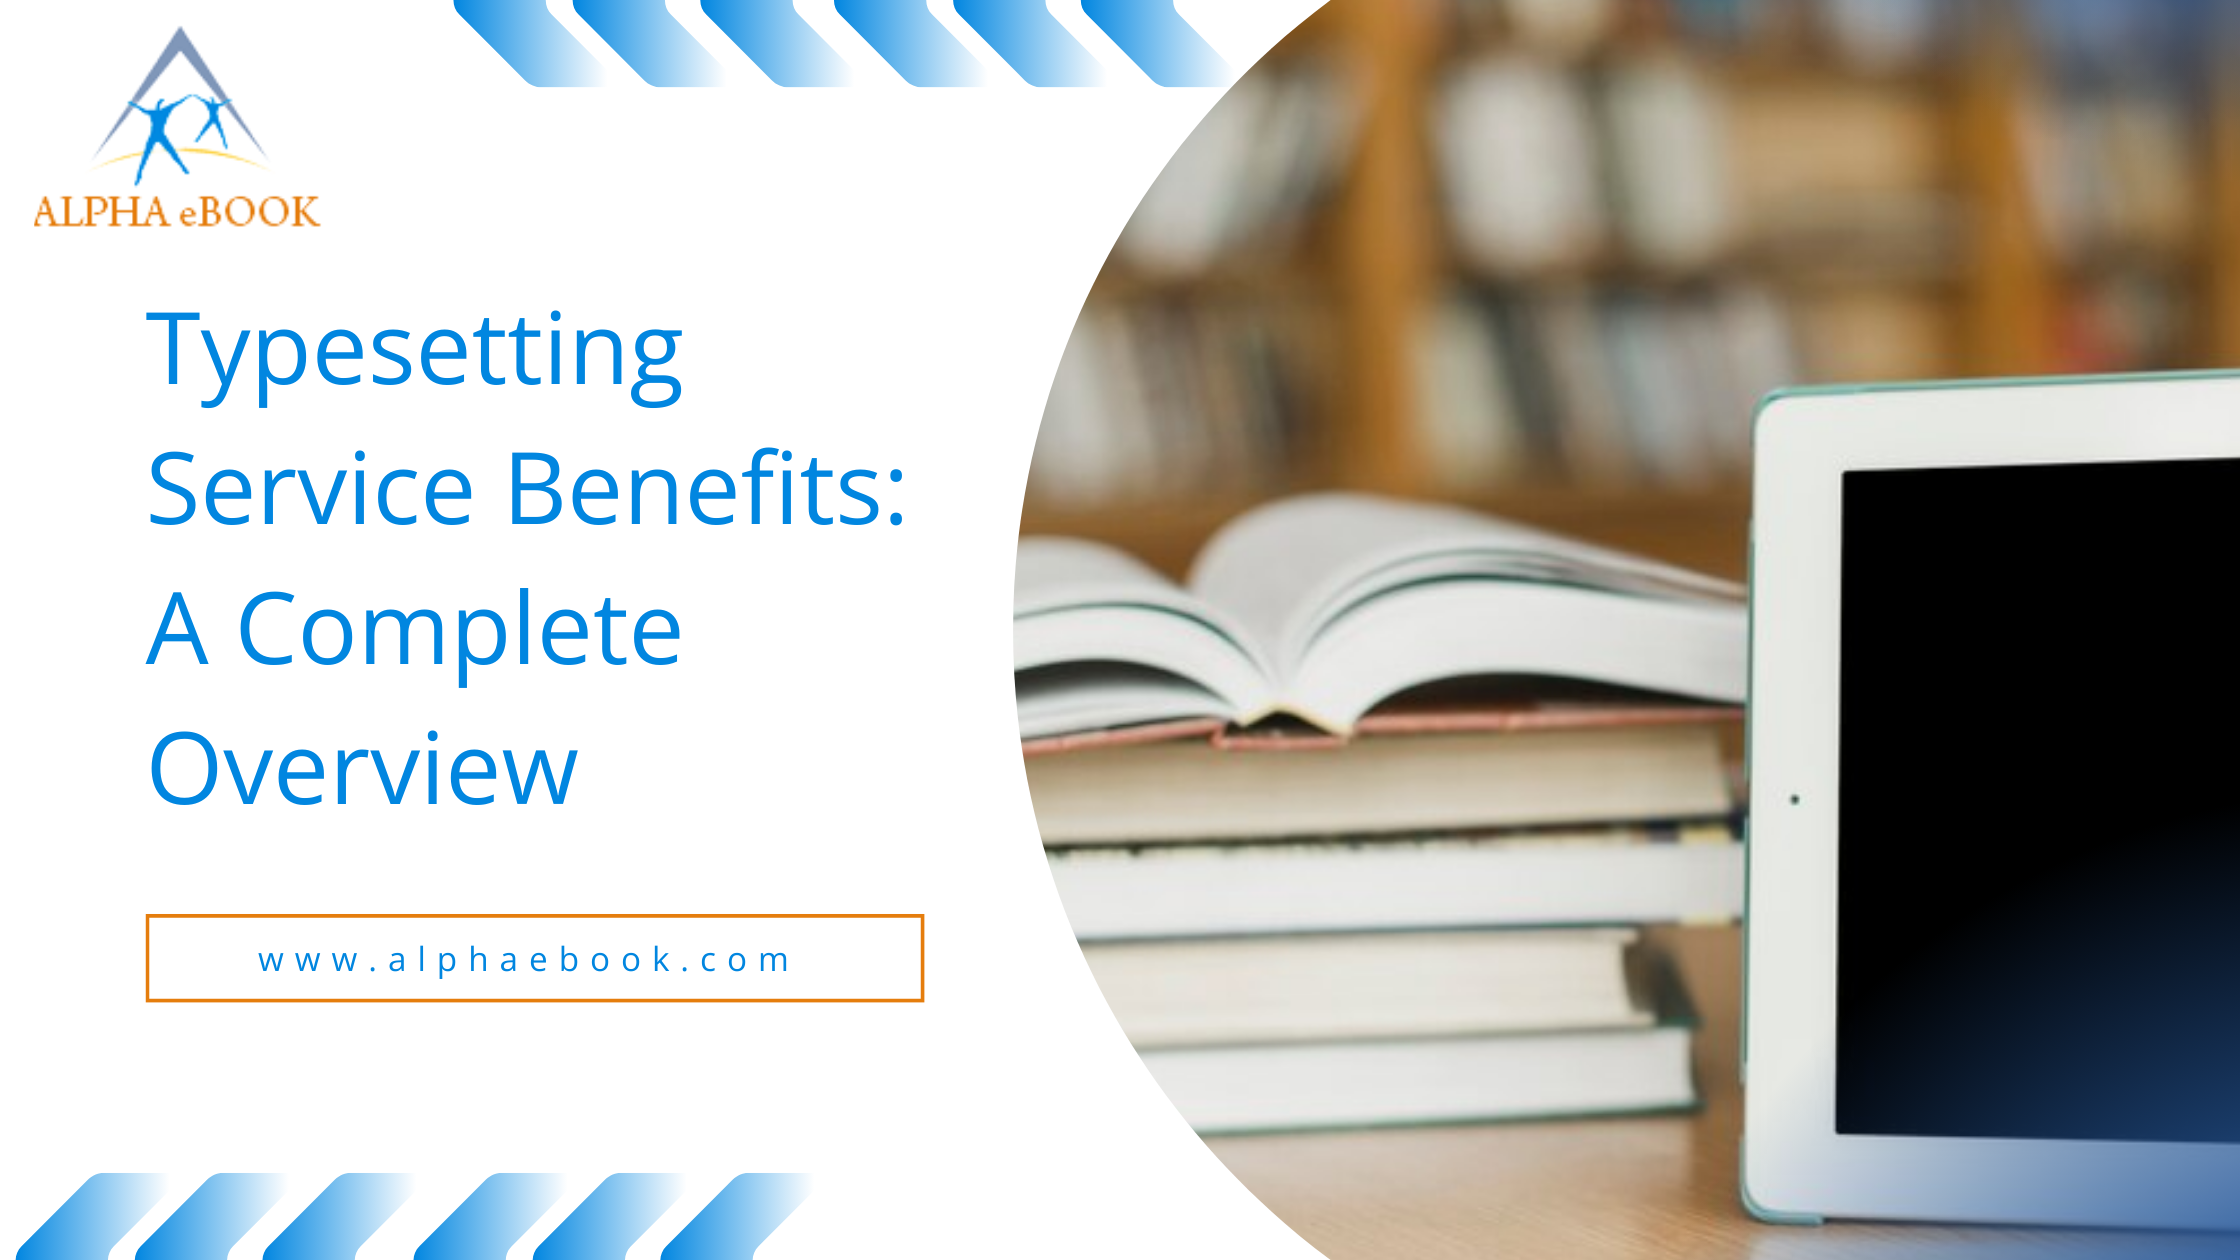 Typesetting Service Benefits: A Complete Overview